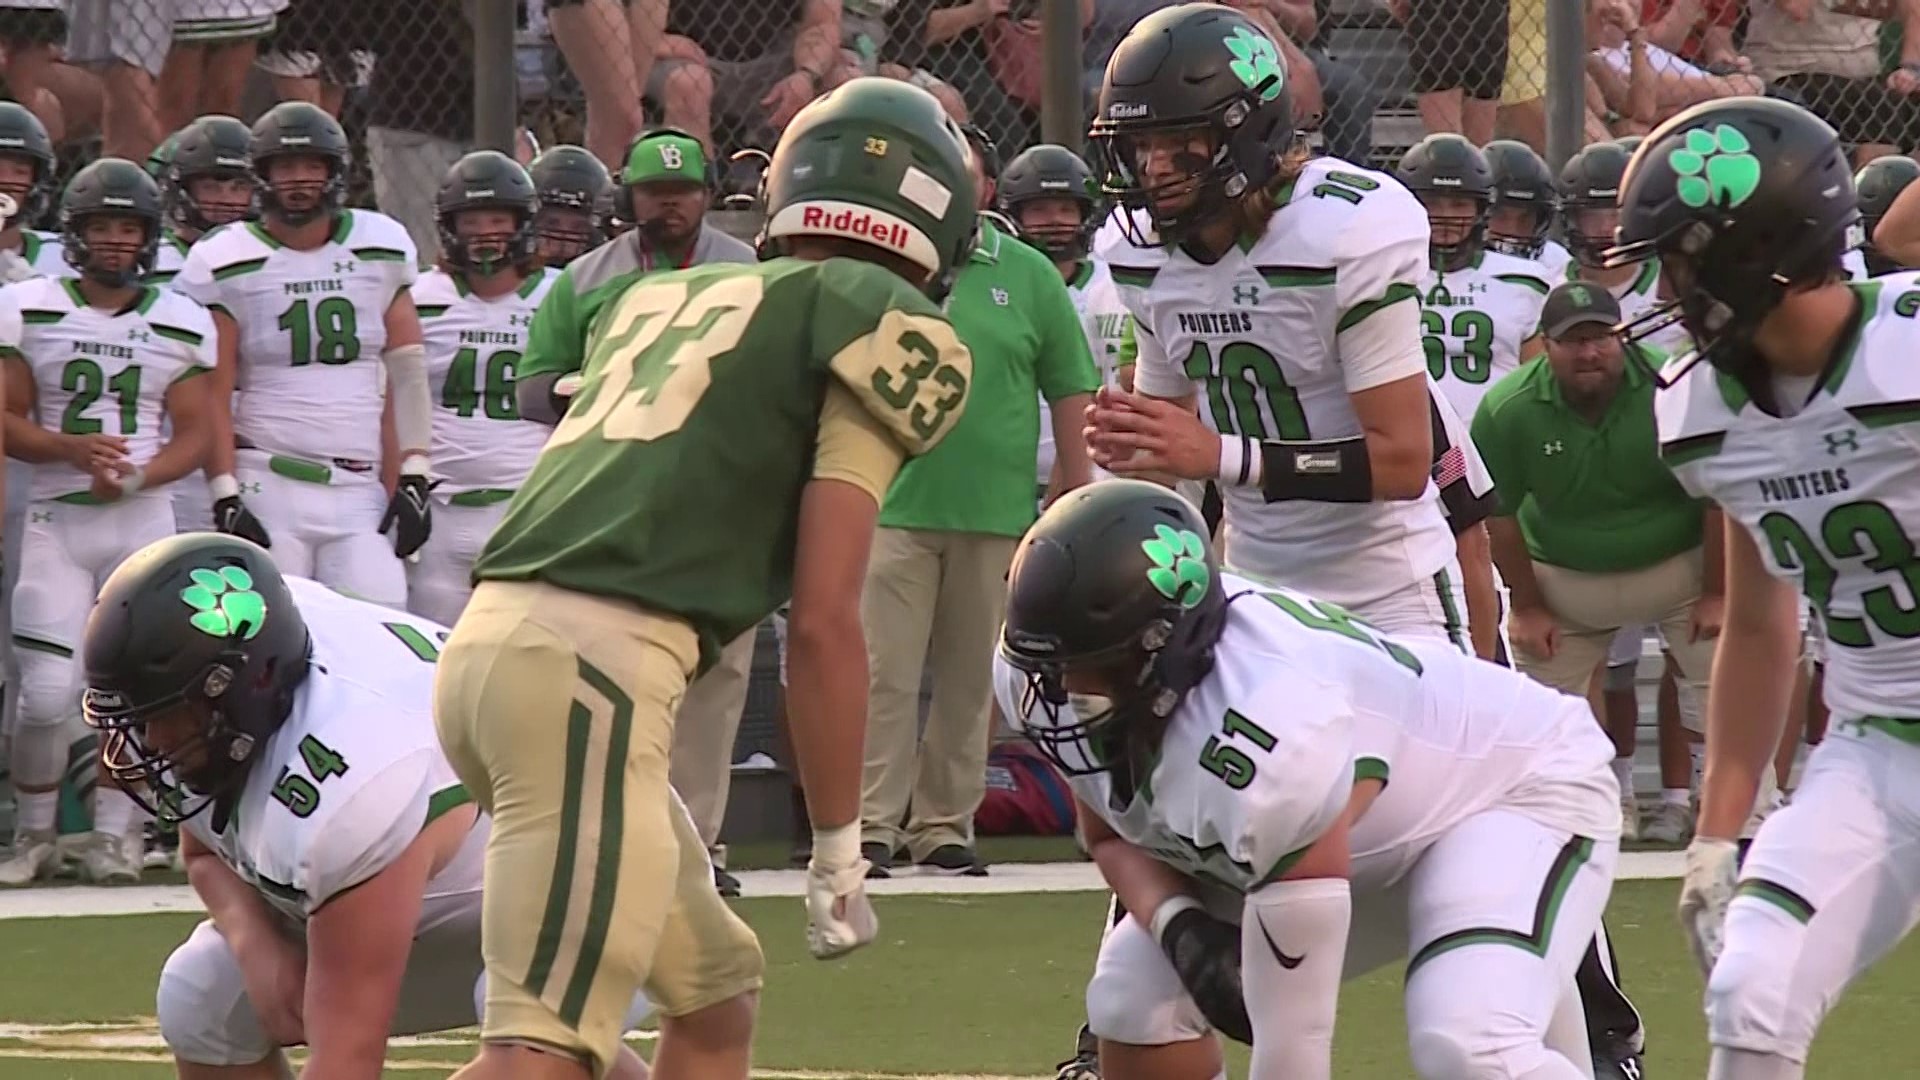 The Alma Airedales went up against the Van Buren Pointers once again in the historic Battle of the Bones.